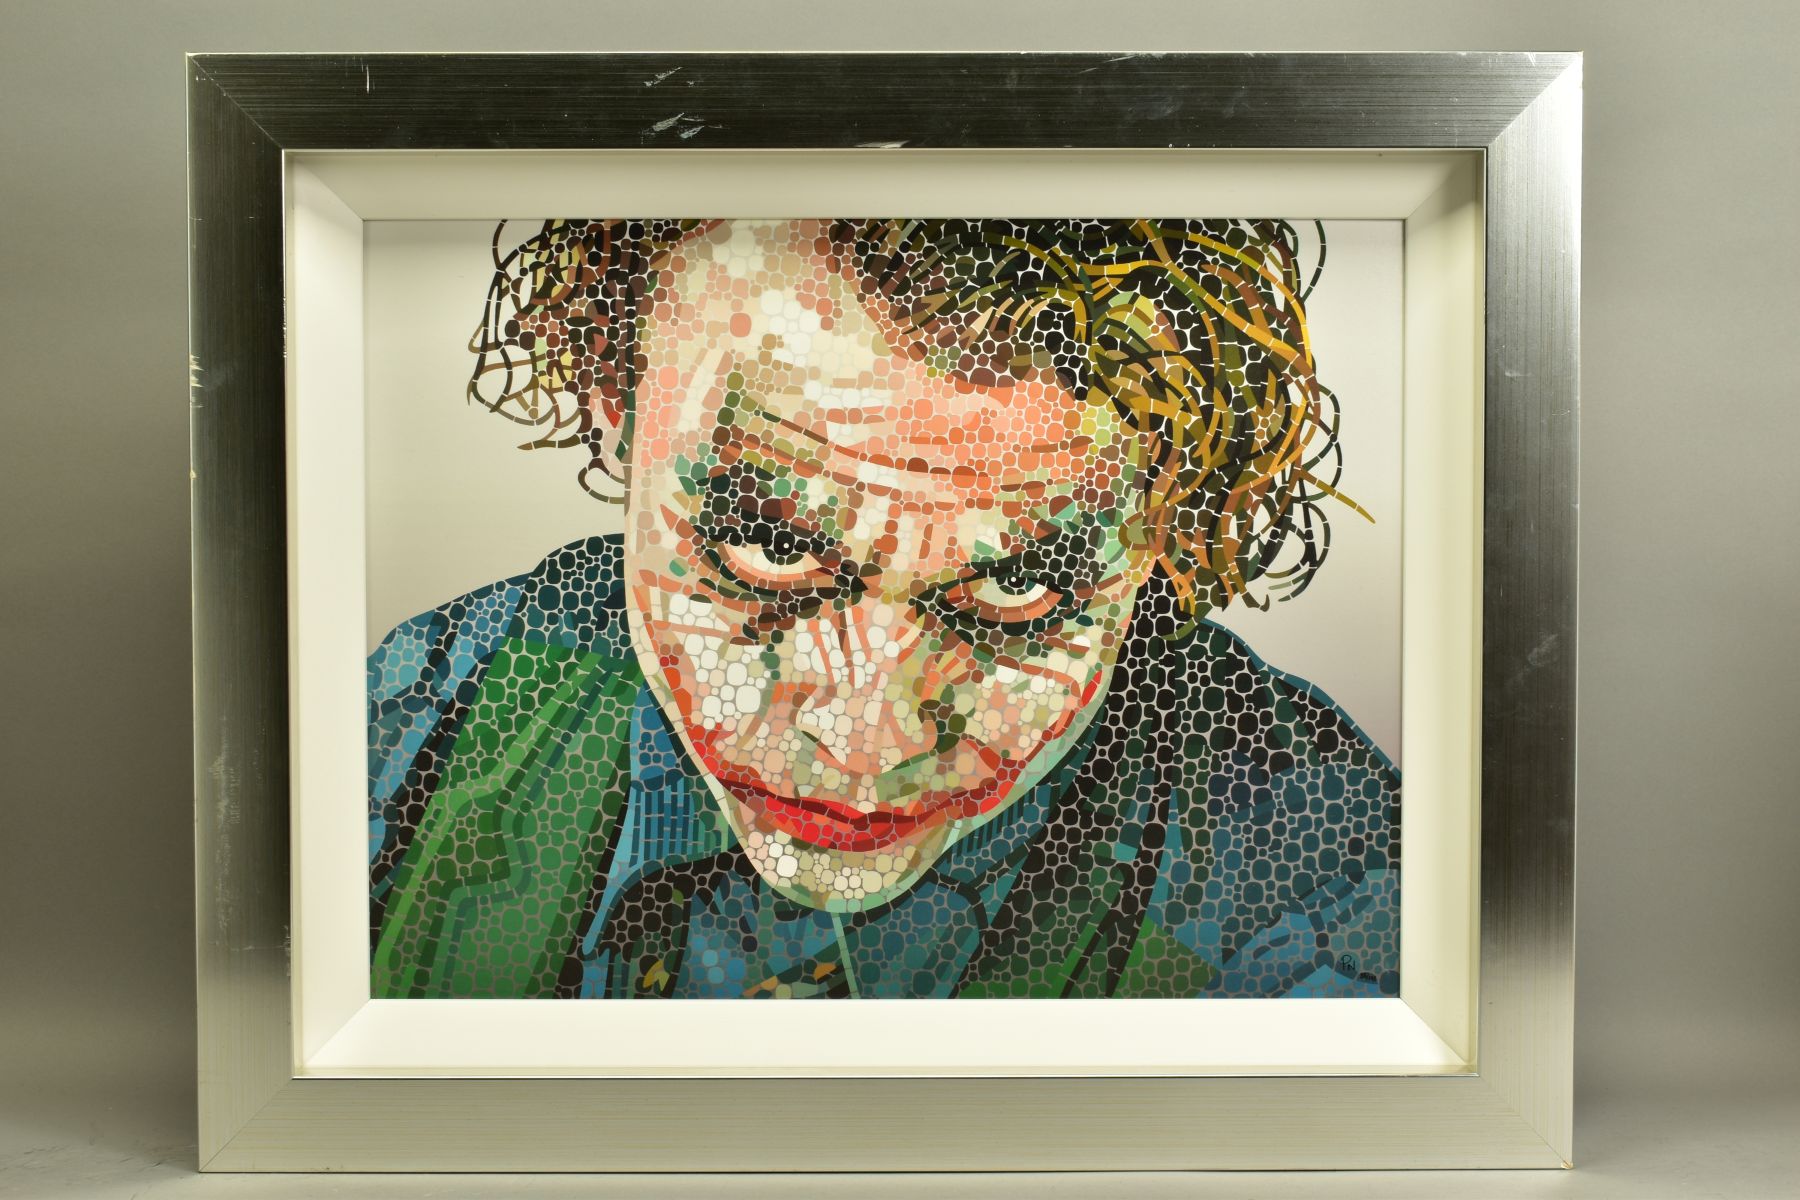 PAUL NORMANSELL (BRITISH 1978), 'Call me Crazy', a limited edition print of Batman's nemesis the